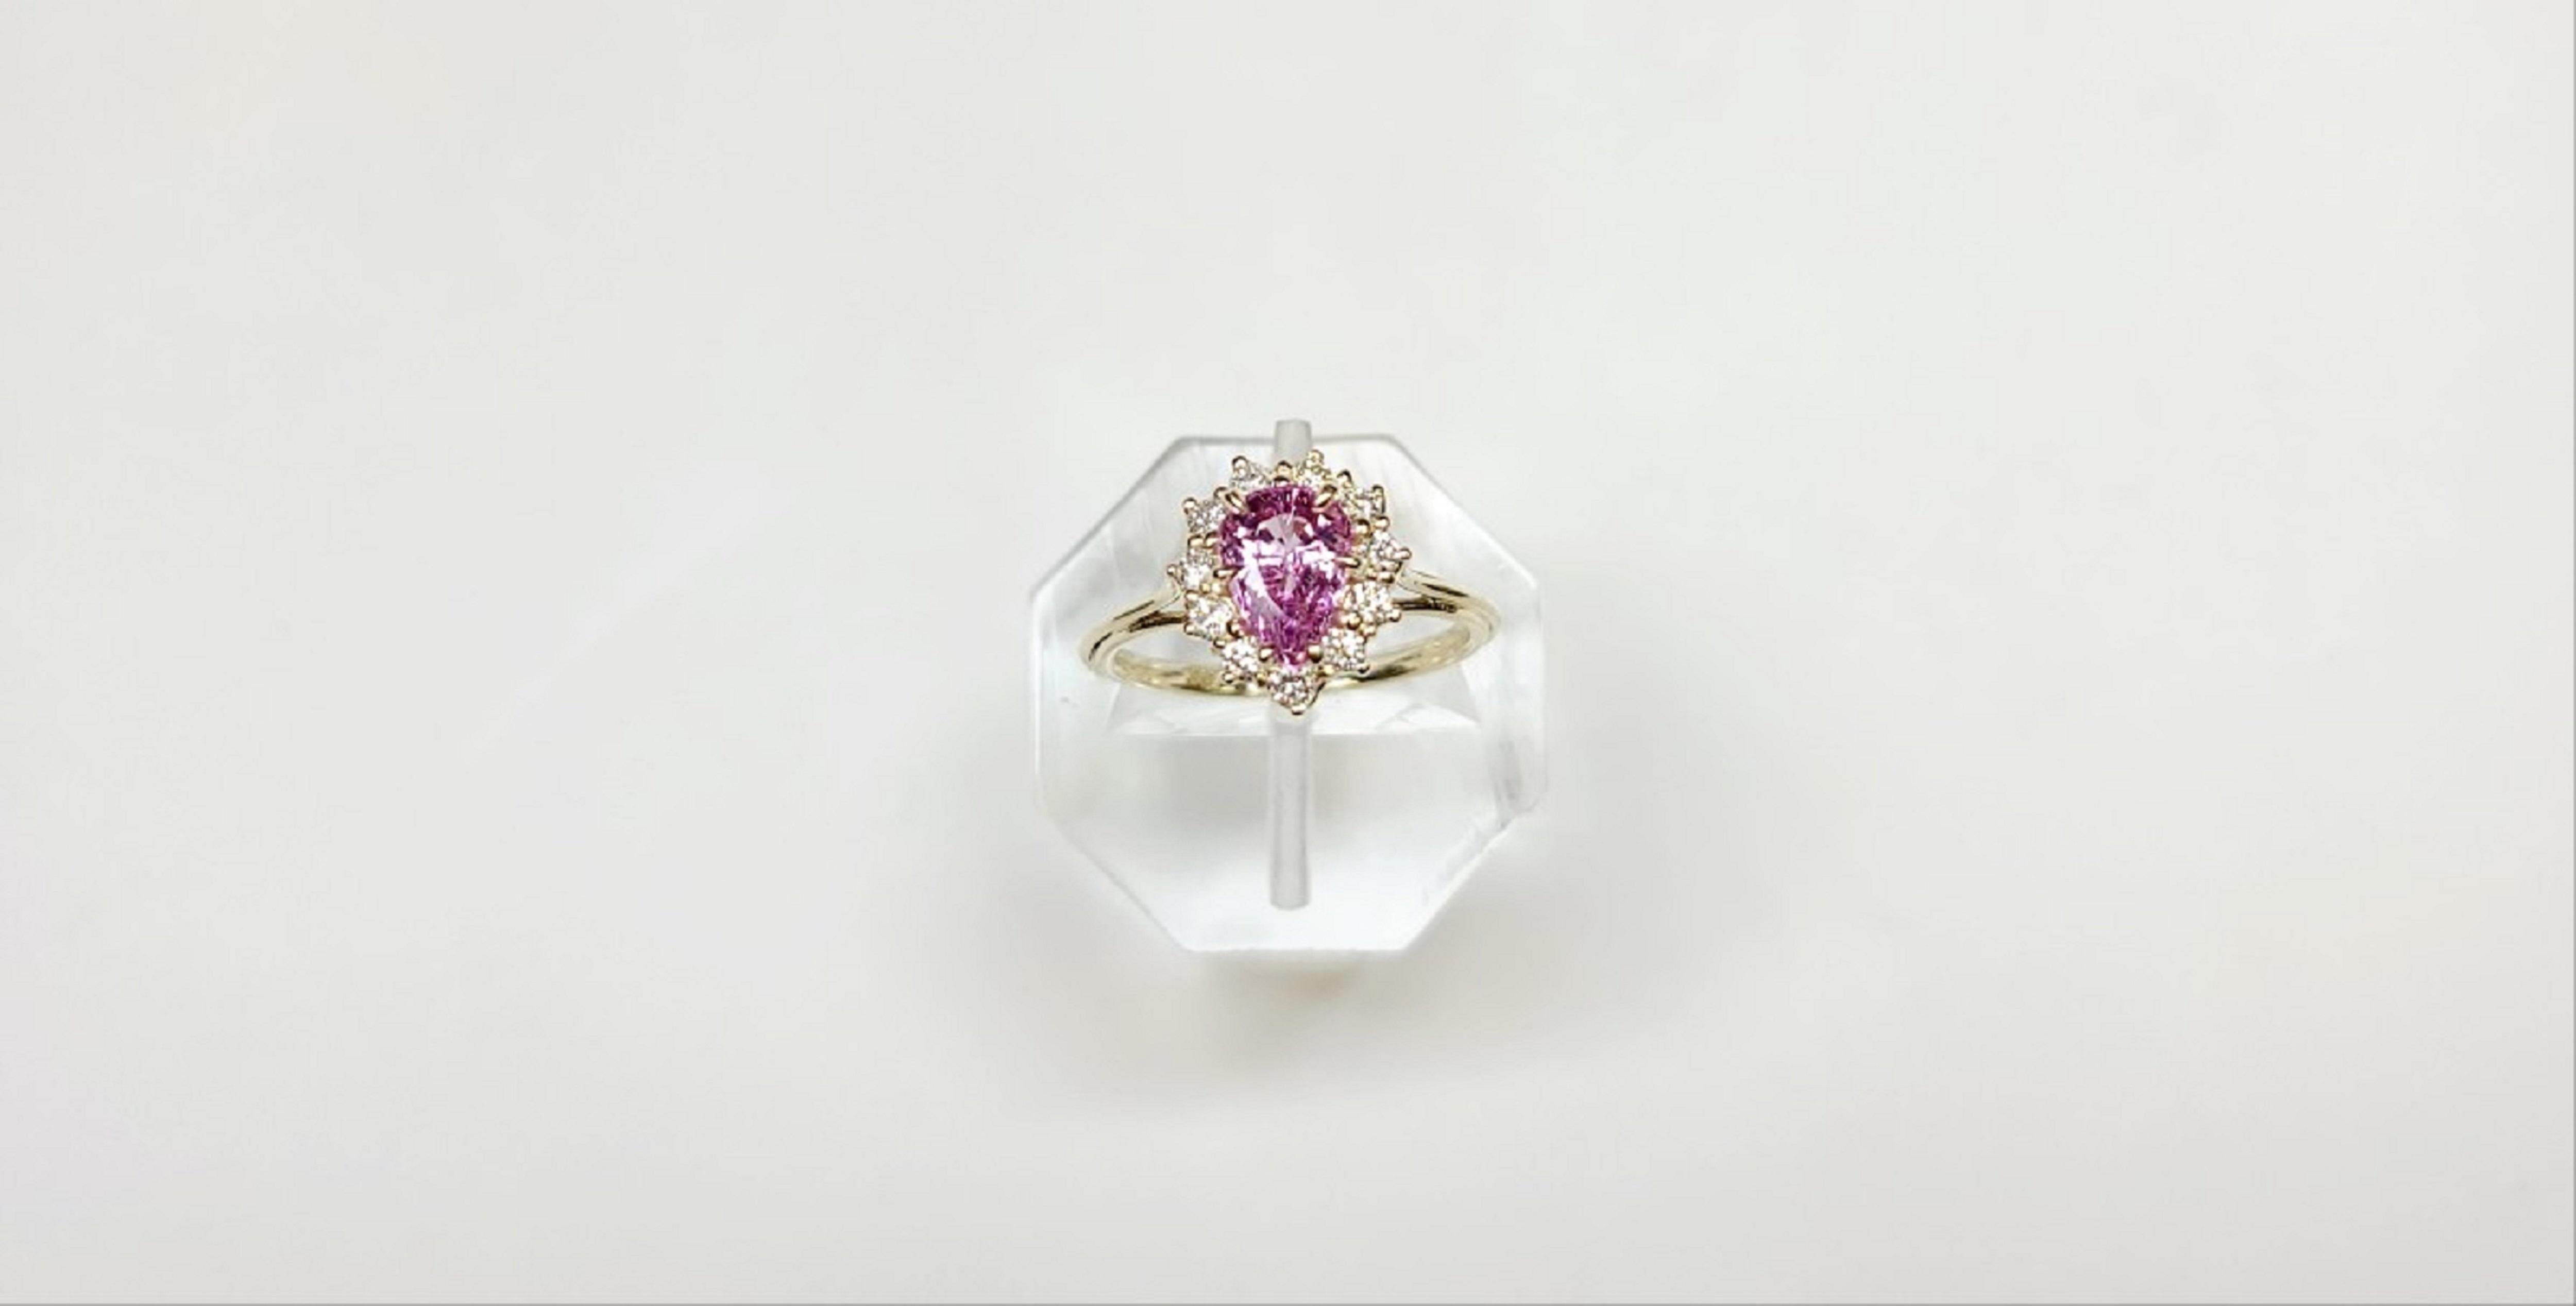 New Cert 1.37 ct Unheated Natural Pink Sapphire Diamond Ring in 14k Gold For Sale 11